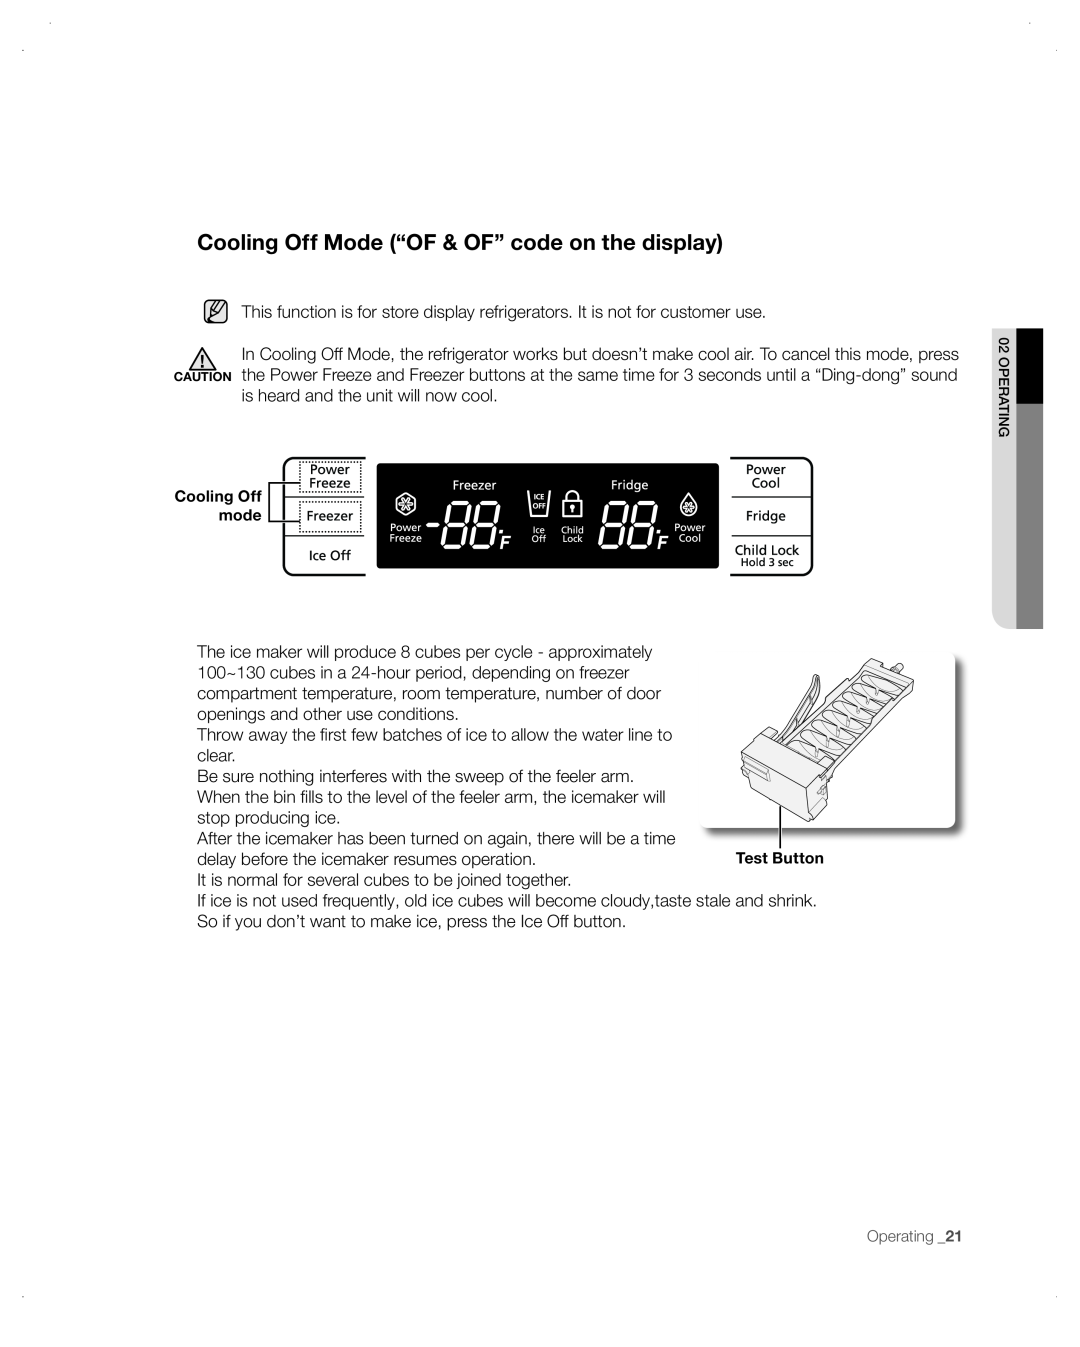 Samsung RB197, RB215ACPN, RB215ACBP, RB215ACWP, RB217, RB195ACPN Cooling Off Mode “OF & OF” code on the display 